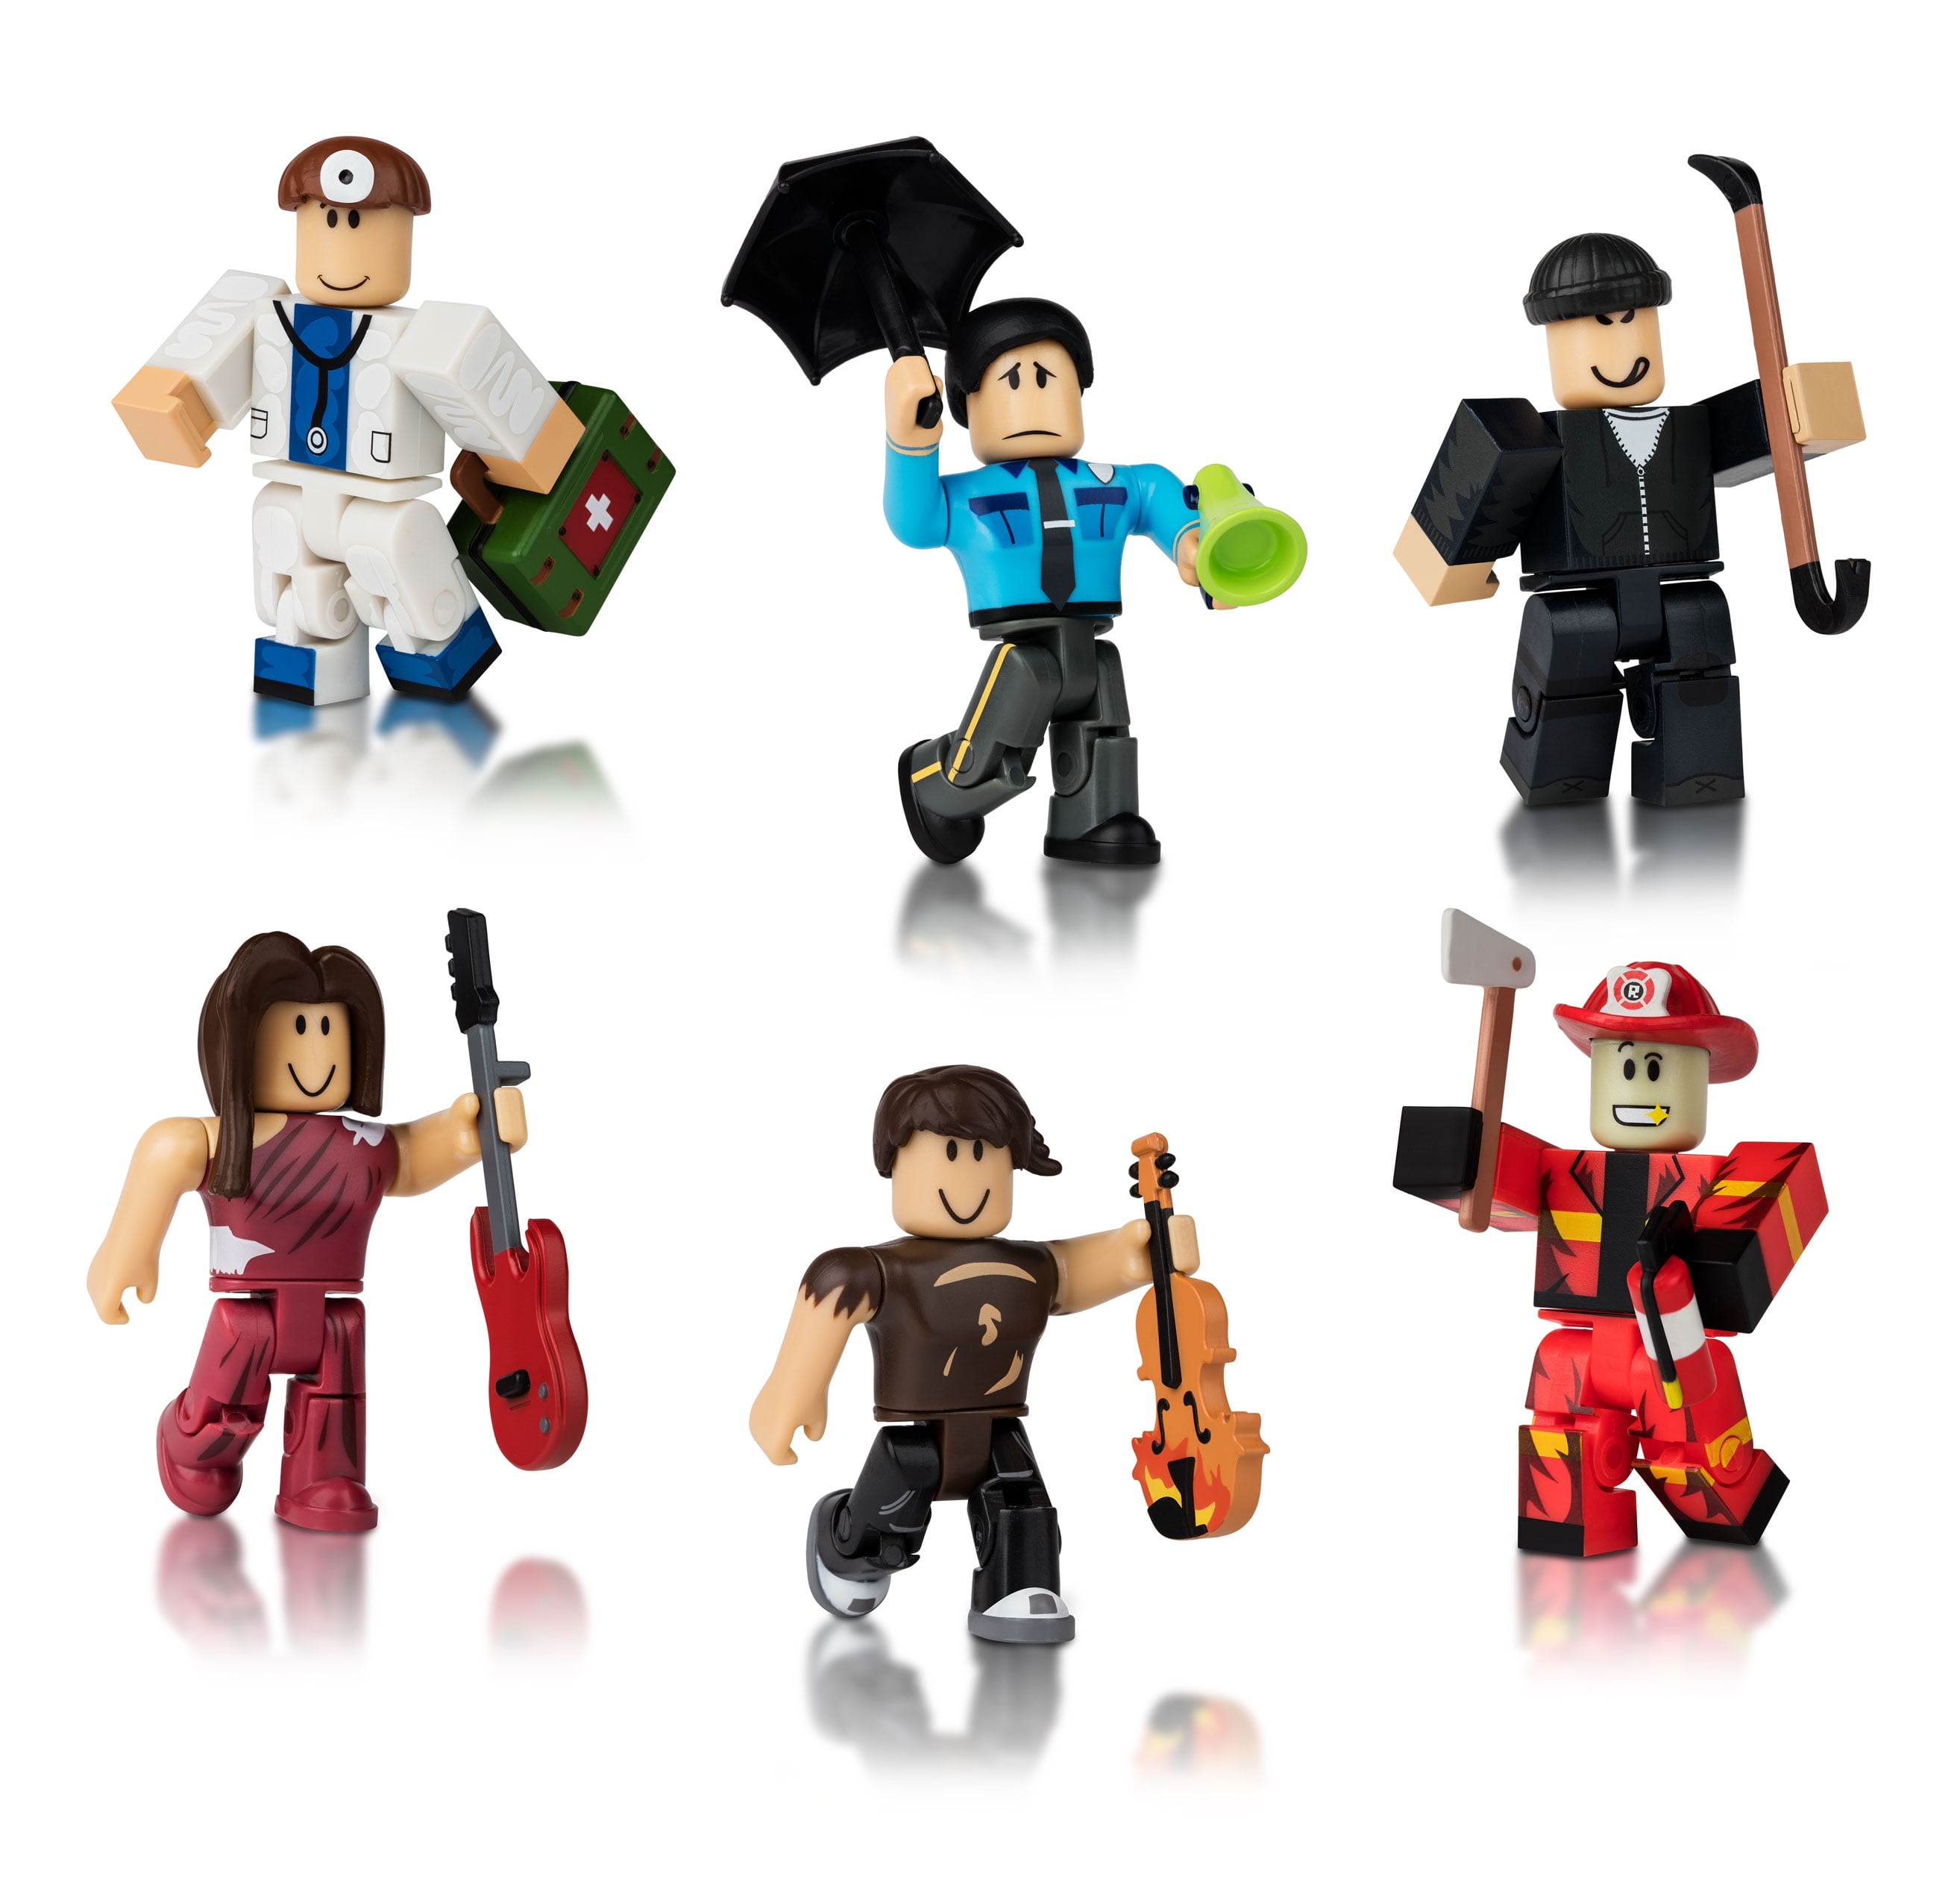 Roblox Action Collection Citizens Of Roblox Six Figure Pack Includes Exclusive Virtual Item Walmart Com Walmart Com - roblox 6 pack